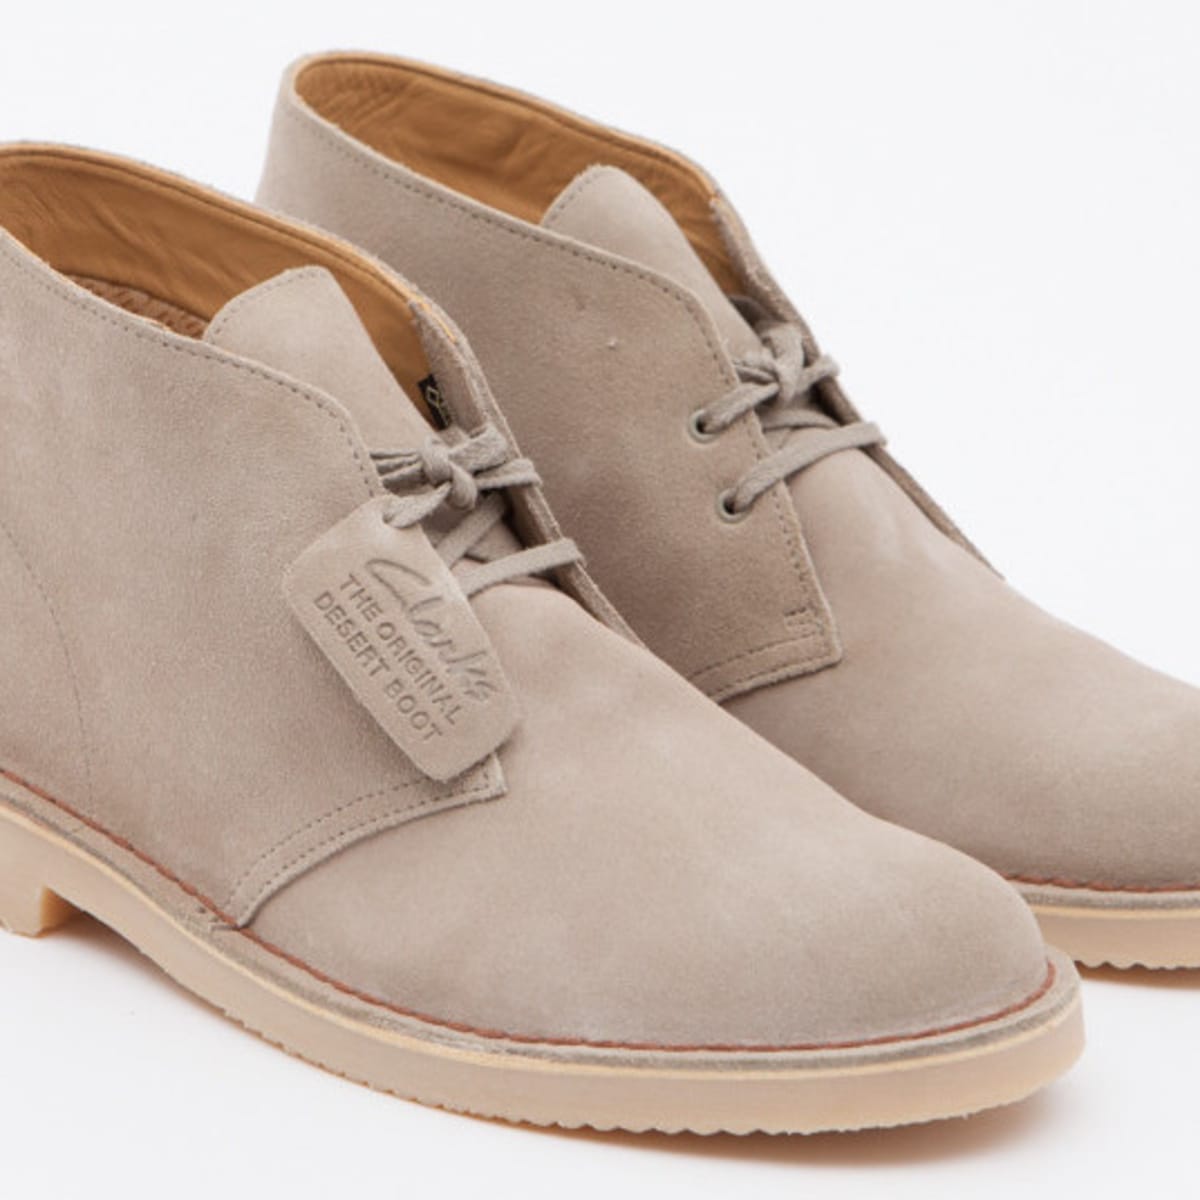 Styrke snigmord grænseflade Finally, Desert Boots You Can Wear In the Rain - Airows